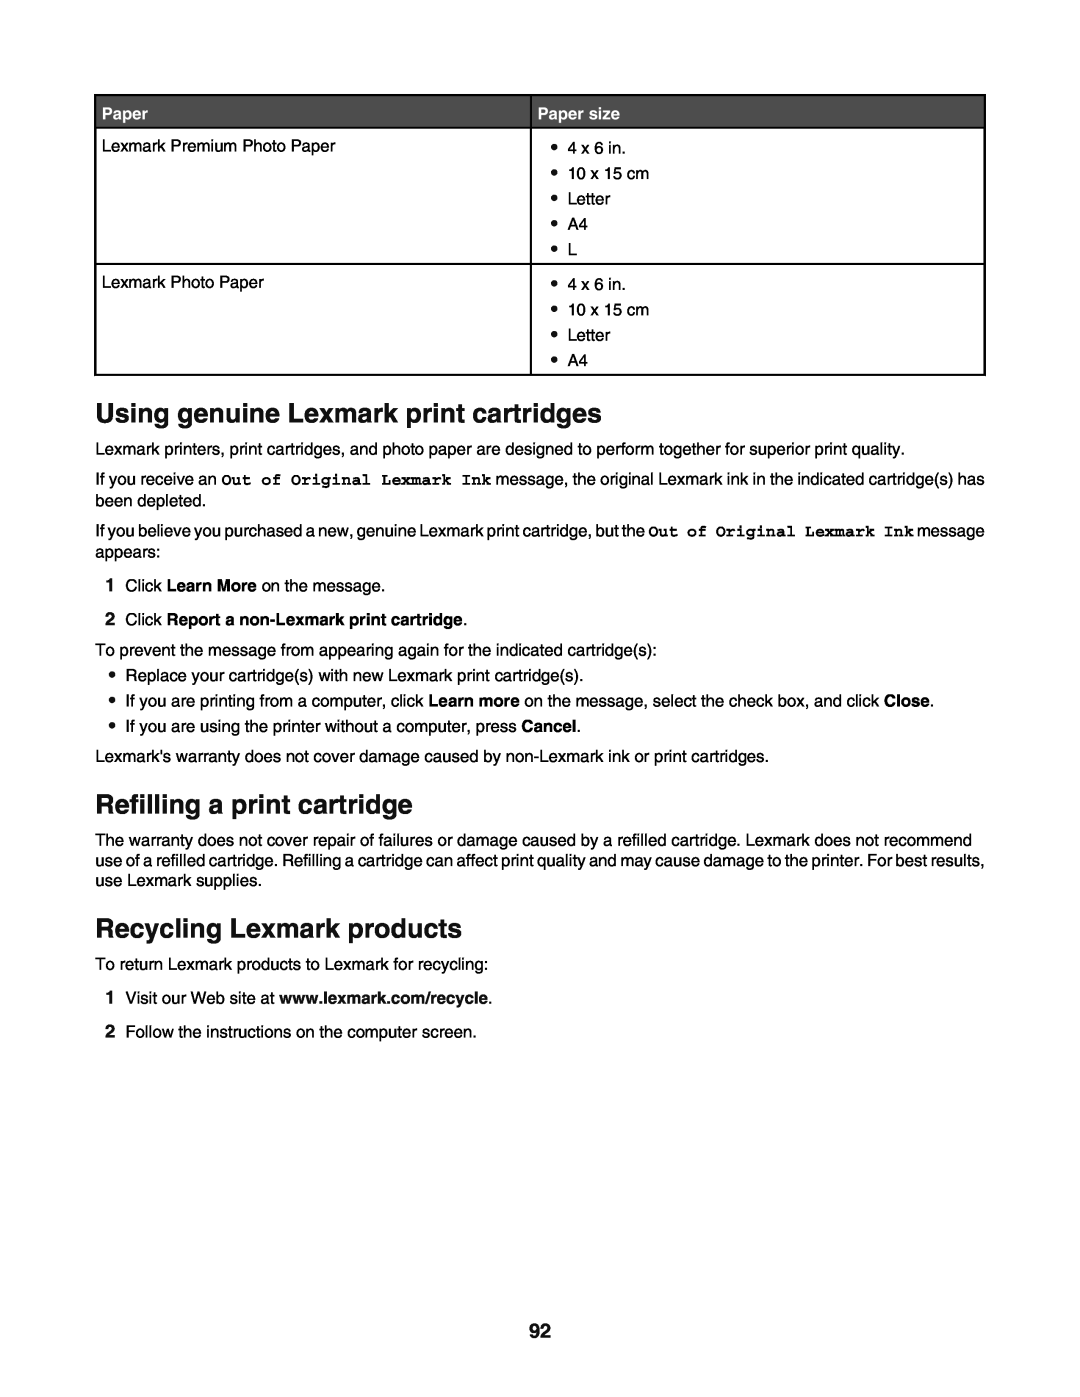 Lexmark 5400 manual Using genuine Lexmark print cartridges, Refilling a print cartridge, Recycling Lexmark products, Paper 